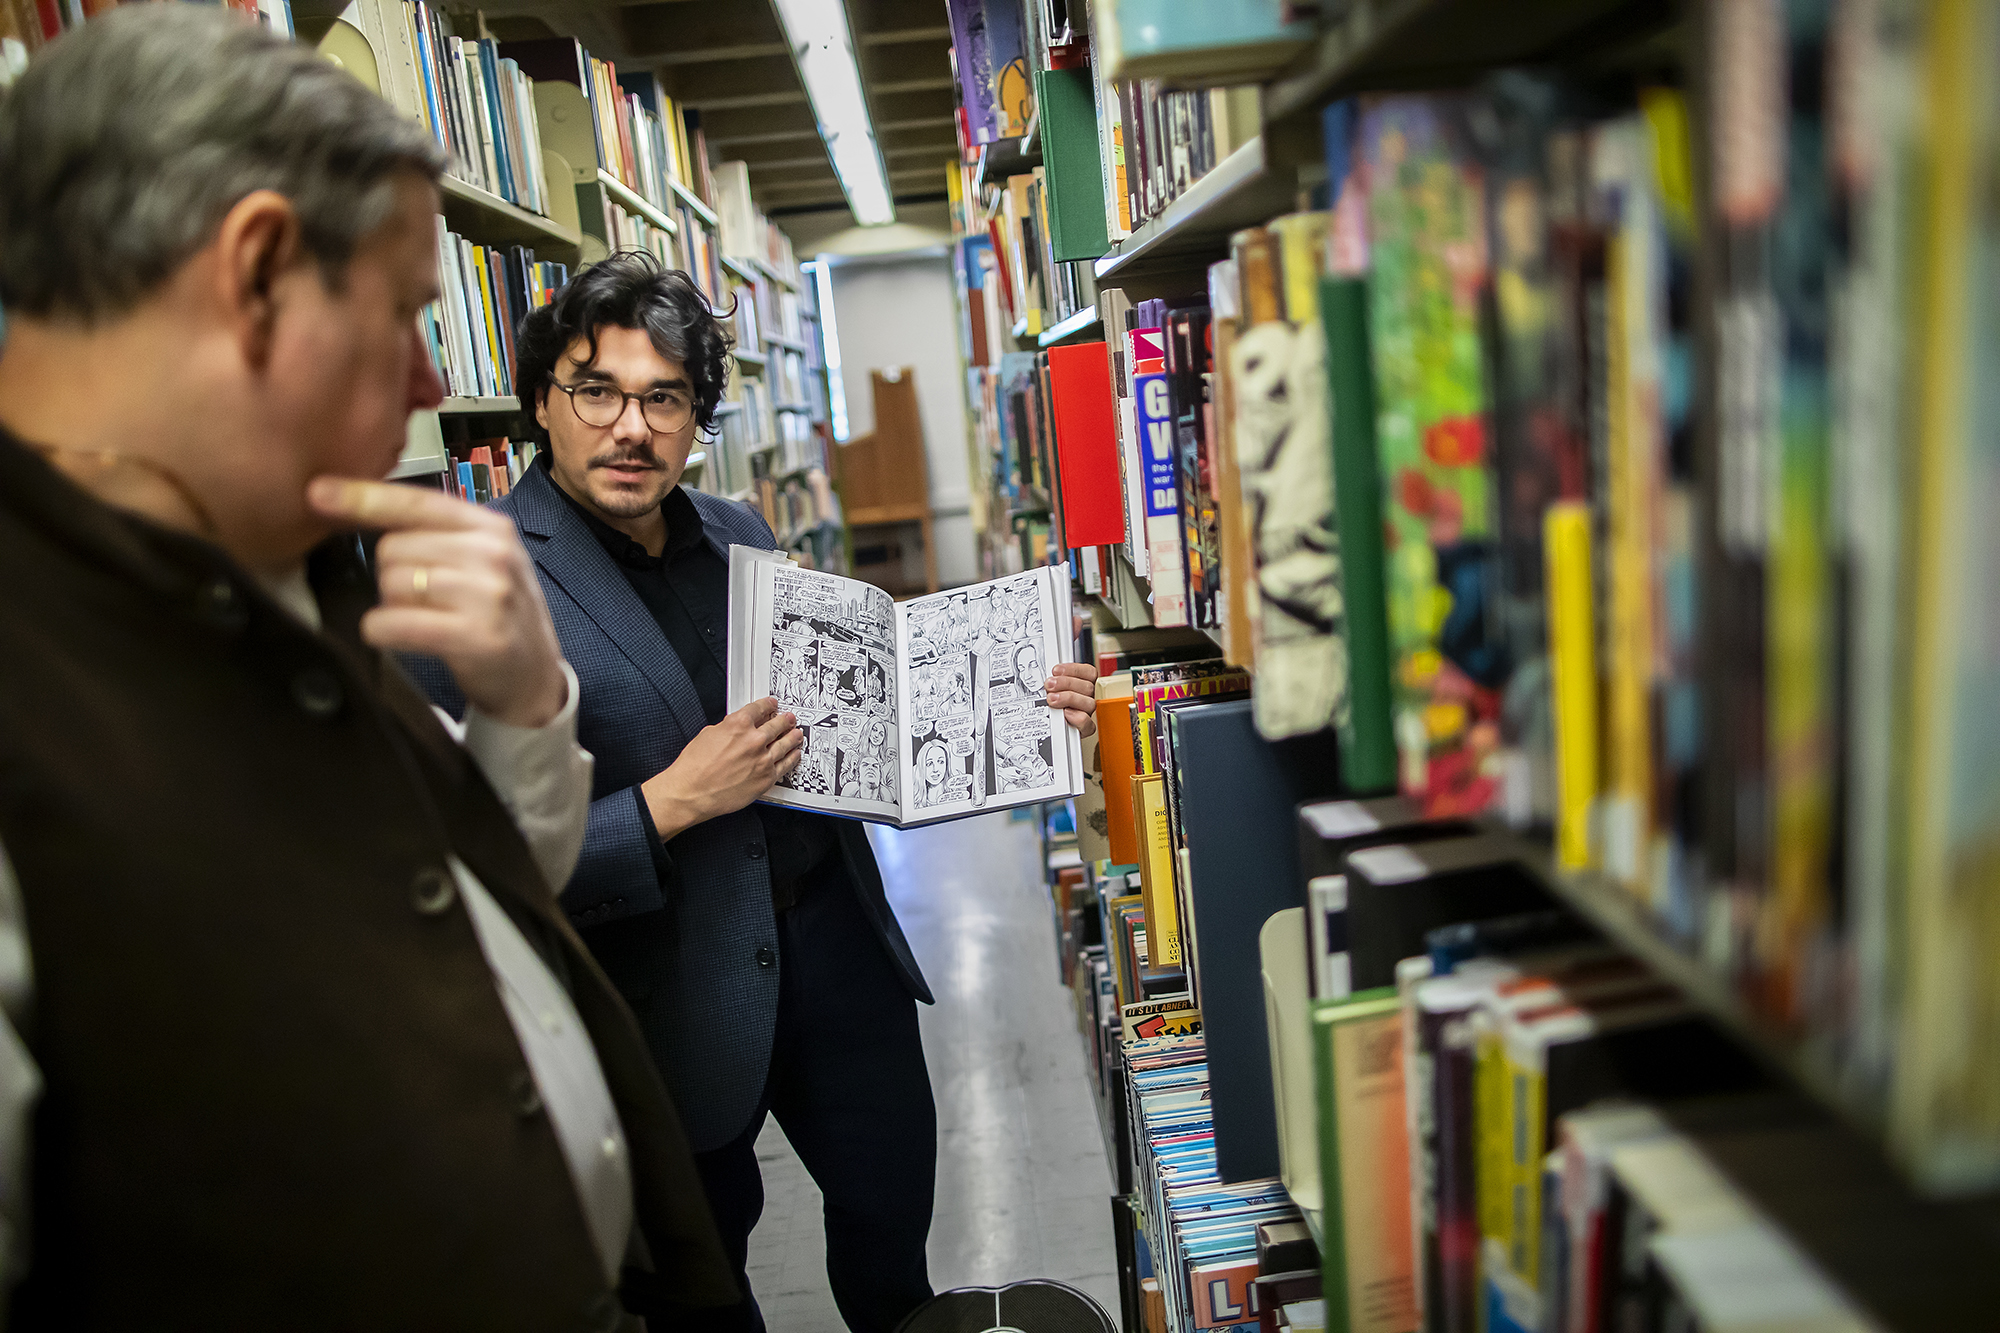 J.C. Cloutier standing by shelves full of books holding open a book with drawings of comics.